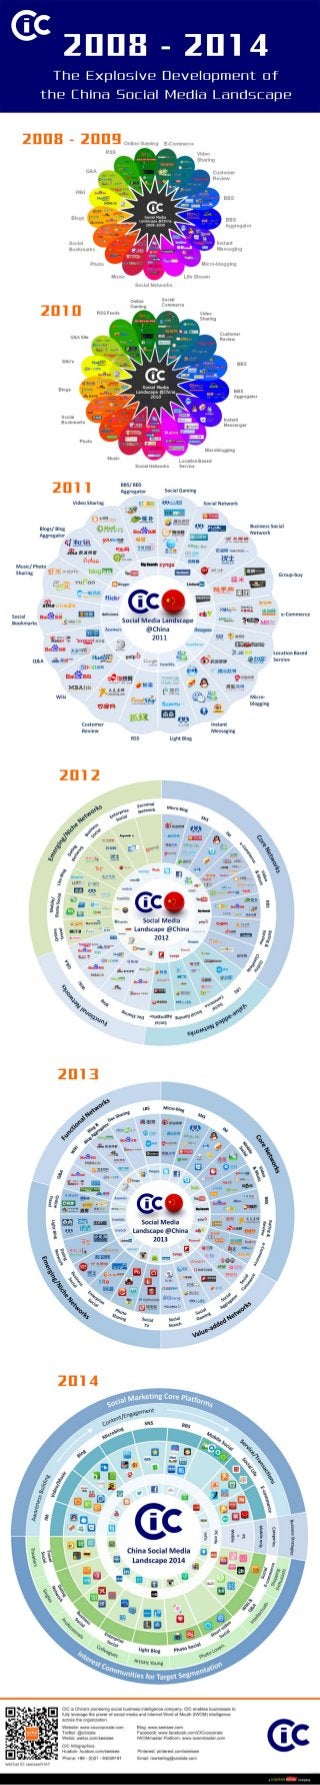 CIC Infographic: 2008 - 2014 the Explosive Development of the China Social Media Landscape 